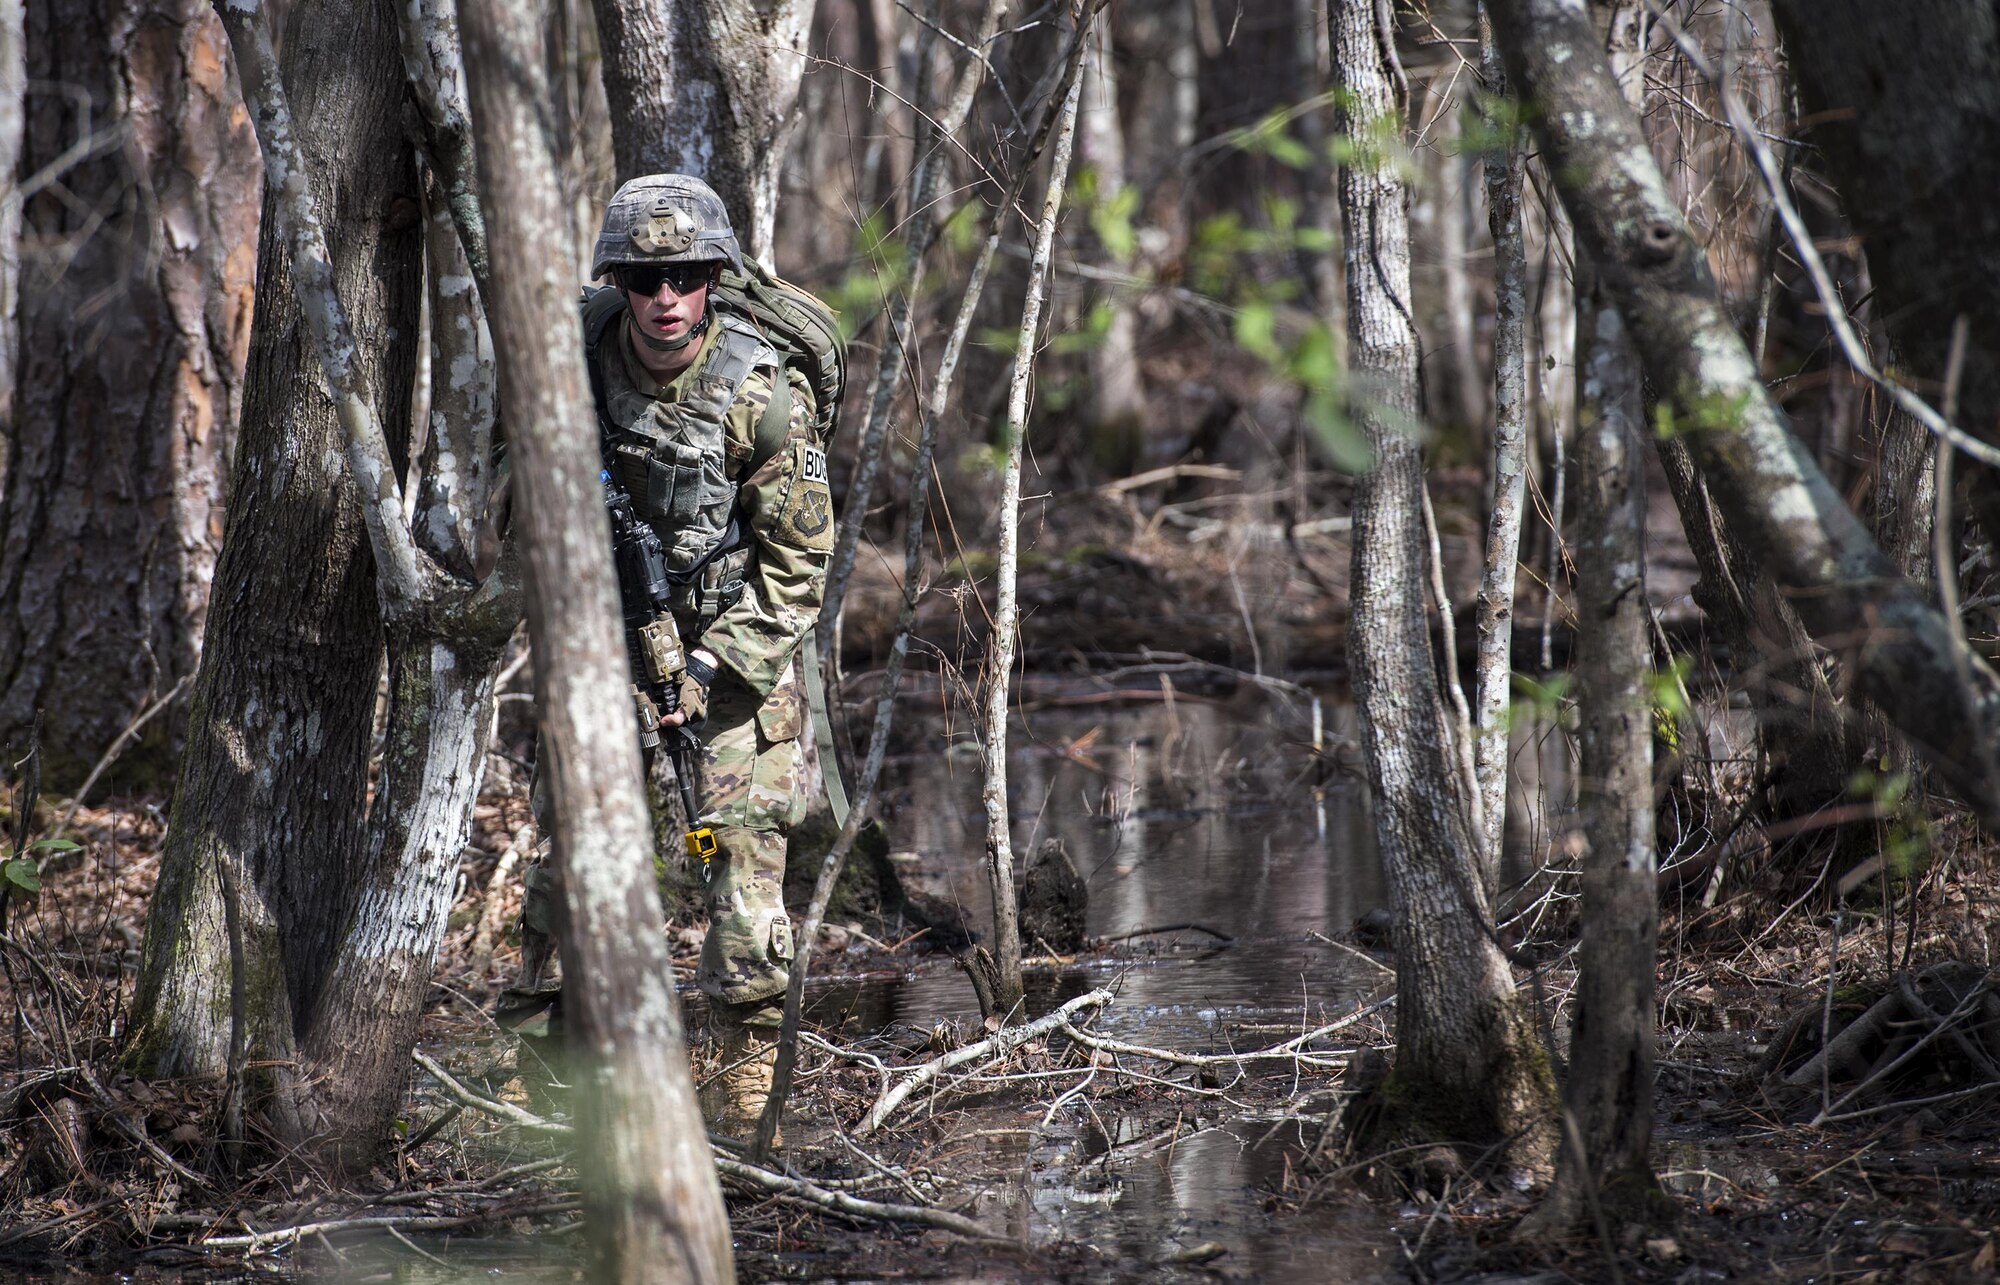 Airman 1st Class Daniel Ross, 822d Base Defense Squadron fireteam member, looks for signs of improvised explosive devices, while simulating patrolling an area outside the wire Feb. 7, 2017, at Moody Air Force Base, Ga. Airmen simulated various missions they would be tasked to complete during a deployment, including being ambushed while out on patrol, gathering intelligence from residents in the local village and raiding buildings. (U.S. Air Force photo by Airman 1st Class Janiqua P. Robinson)